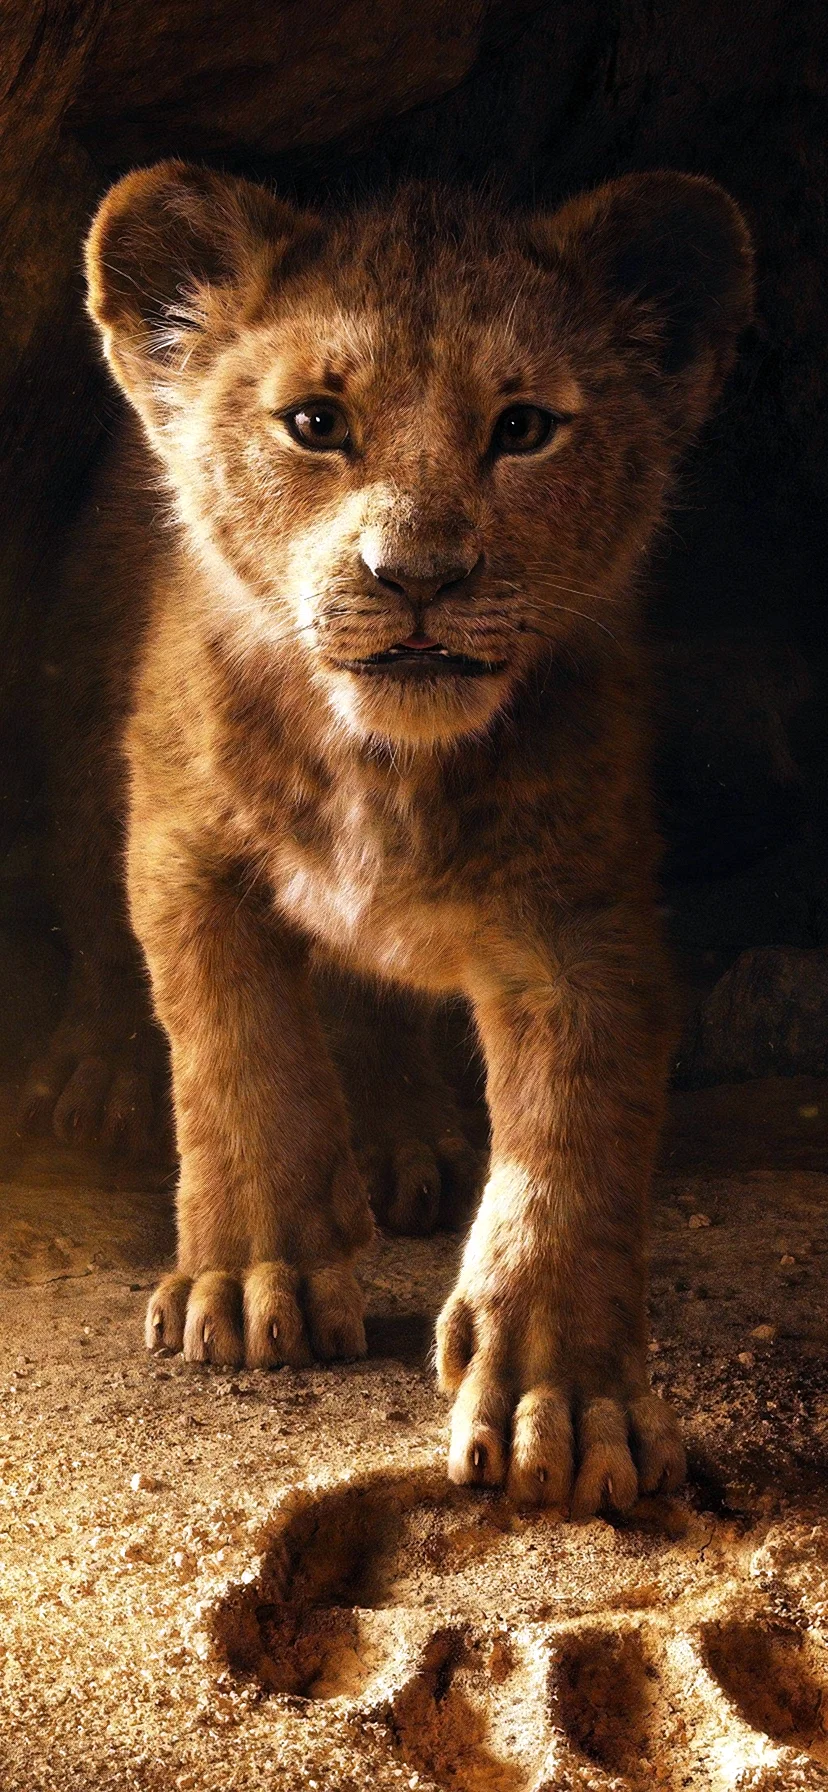 The Lion King 2019 Wallpaper for iPhone 11